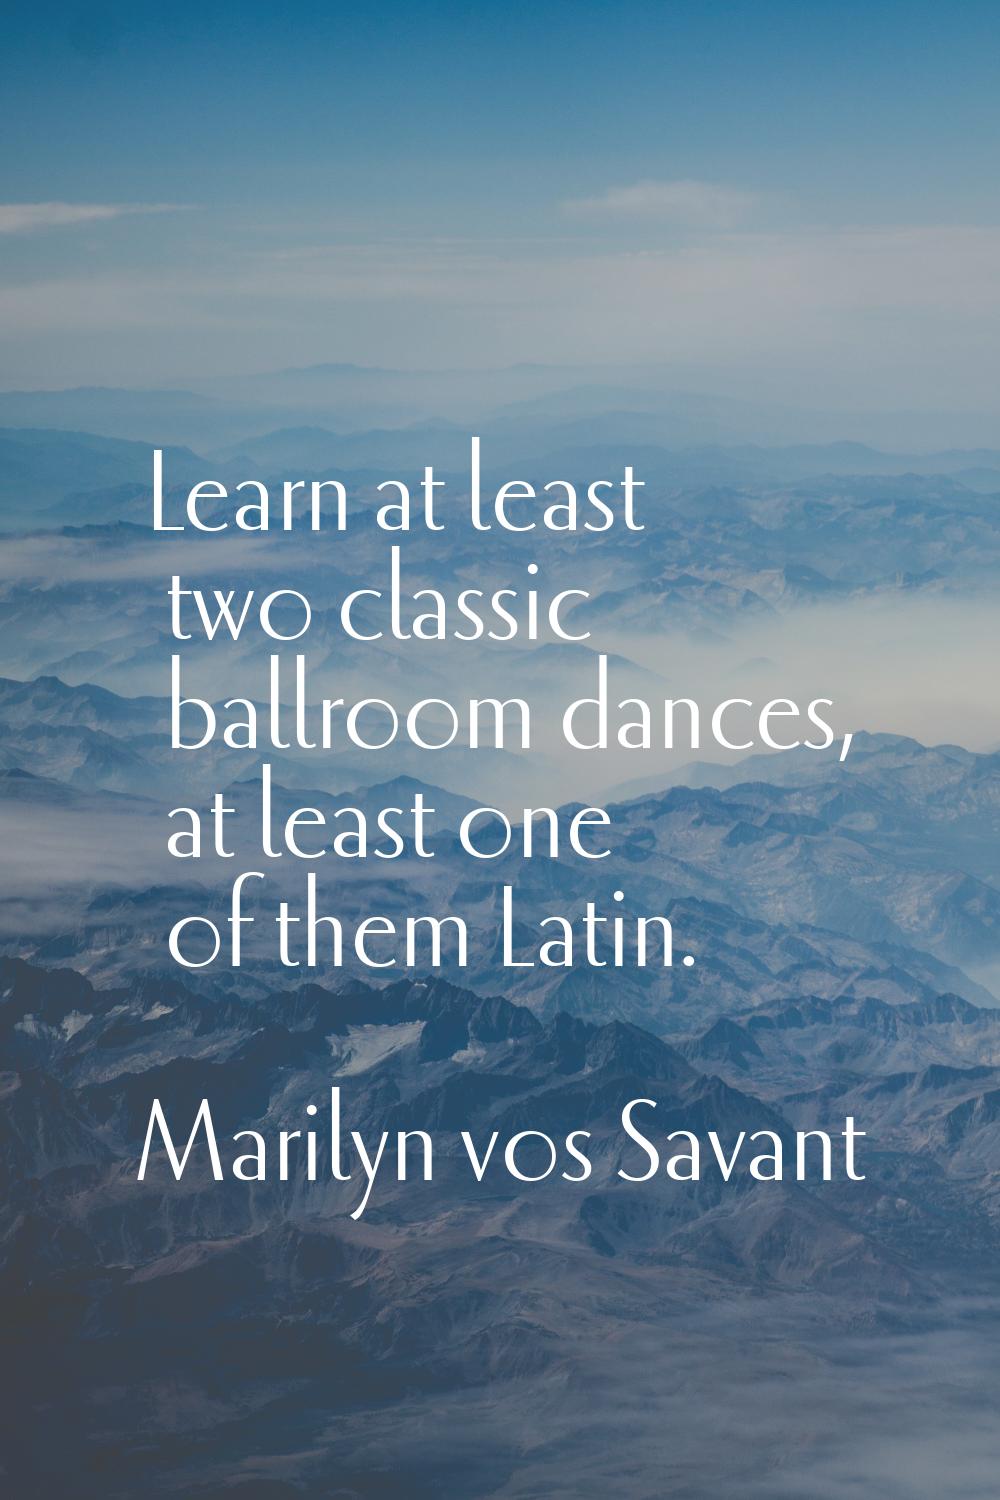 Learn at least two classic ballroom dances, at least one of them Latin.